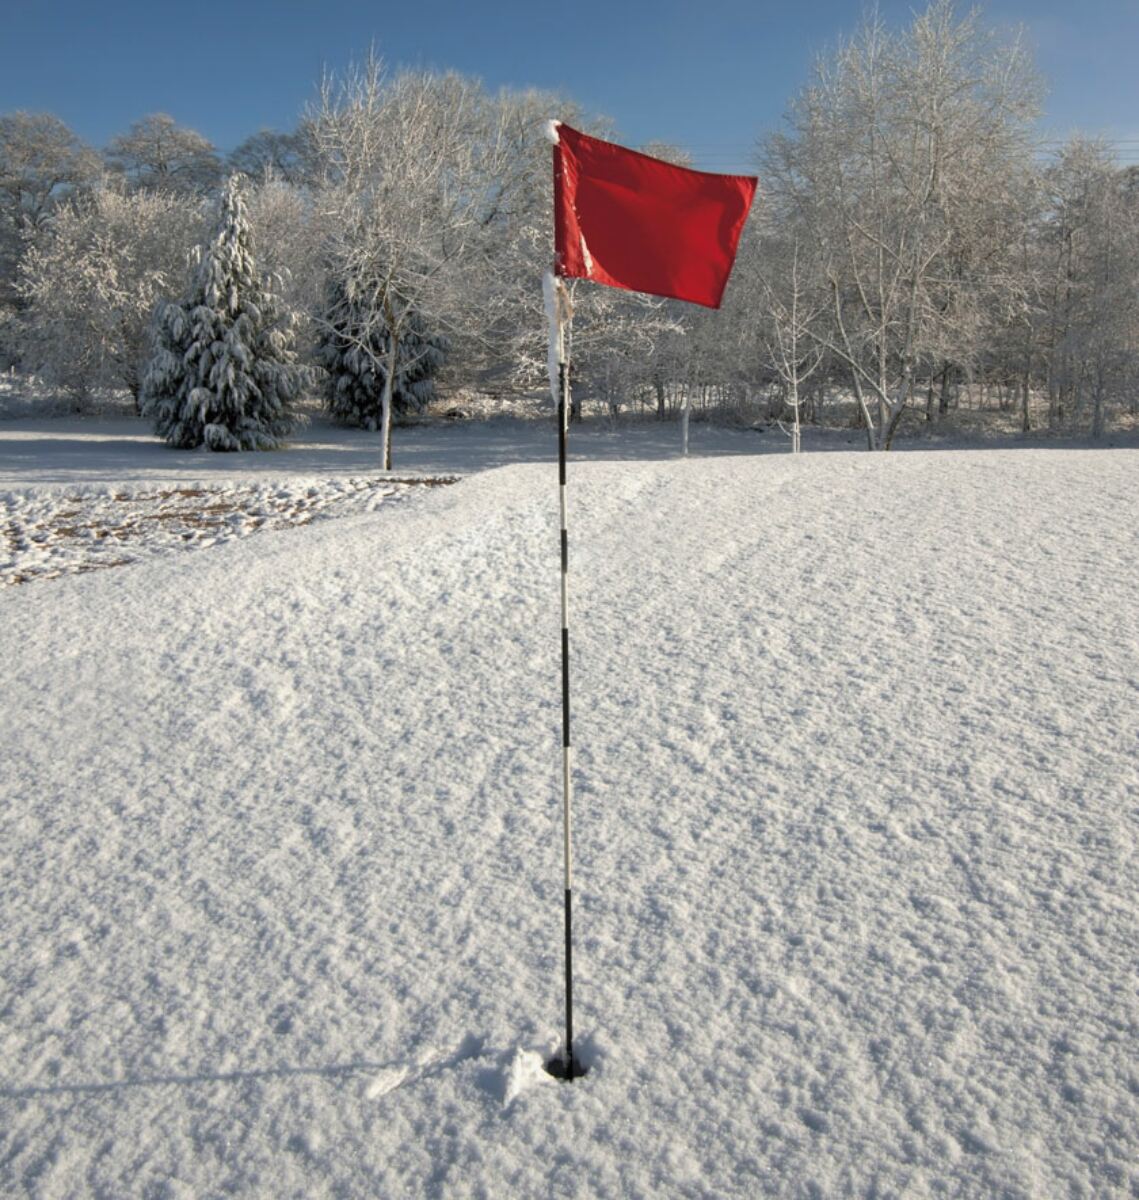 5 perfect excuses for getting some time on the green over Christmas